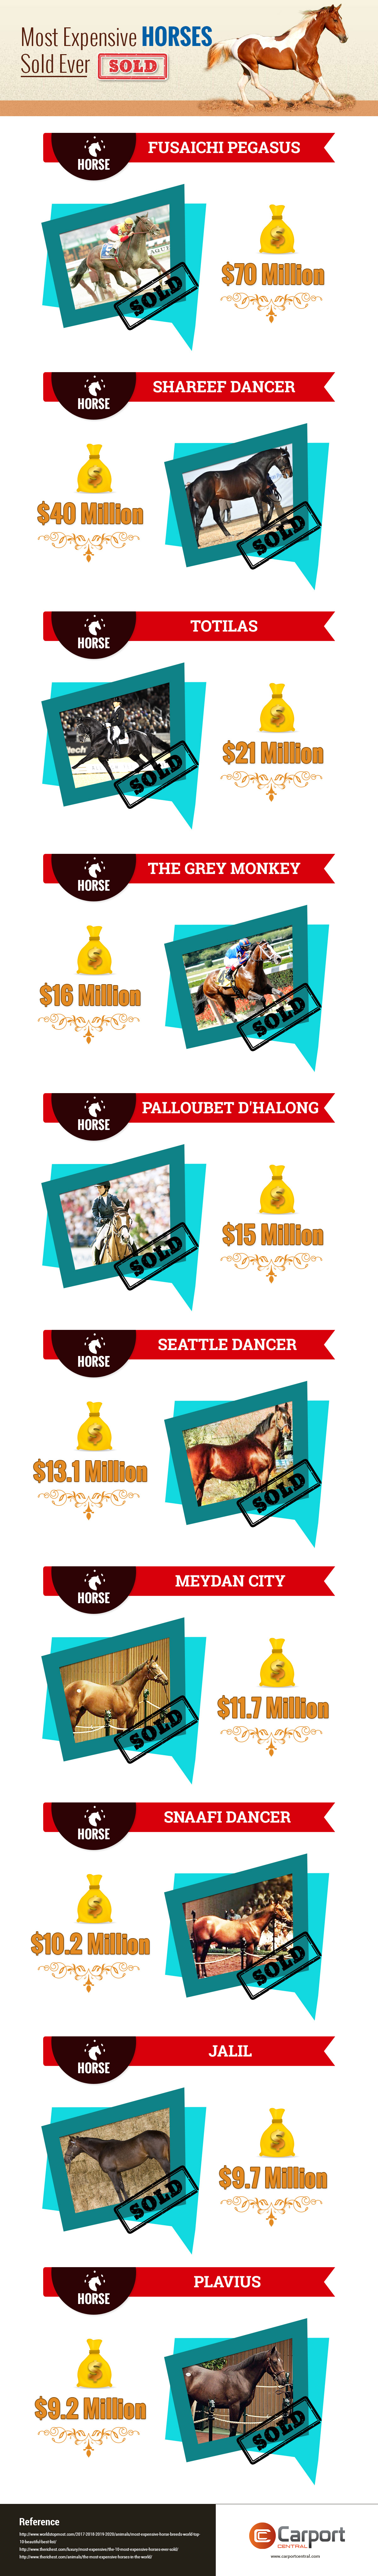 Most-Expensive-Horses-Sold-Ever